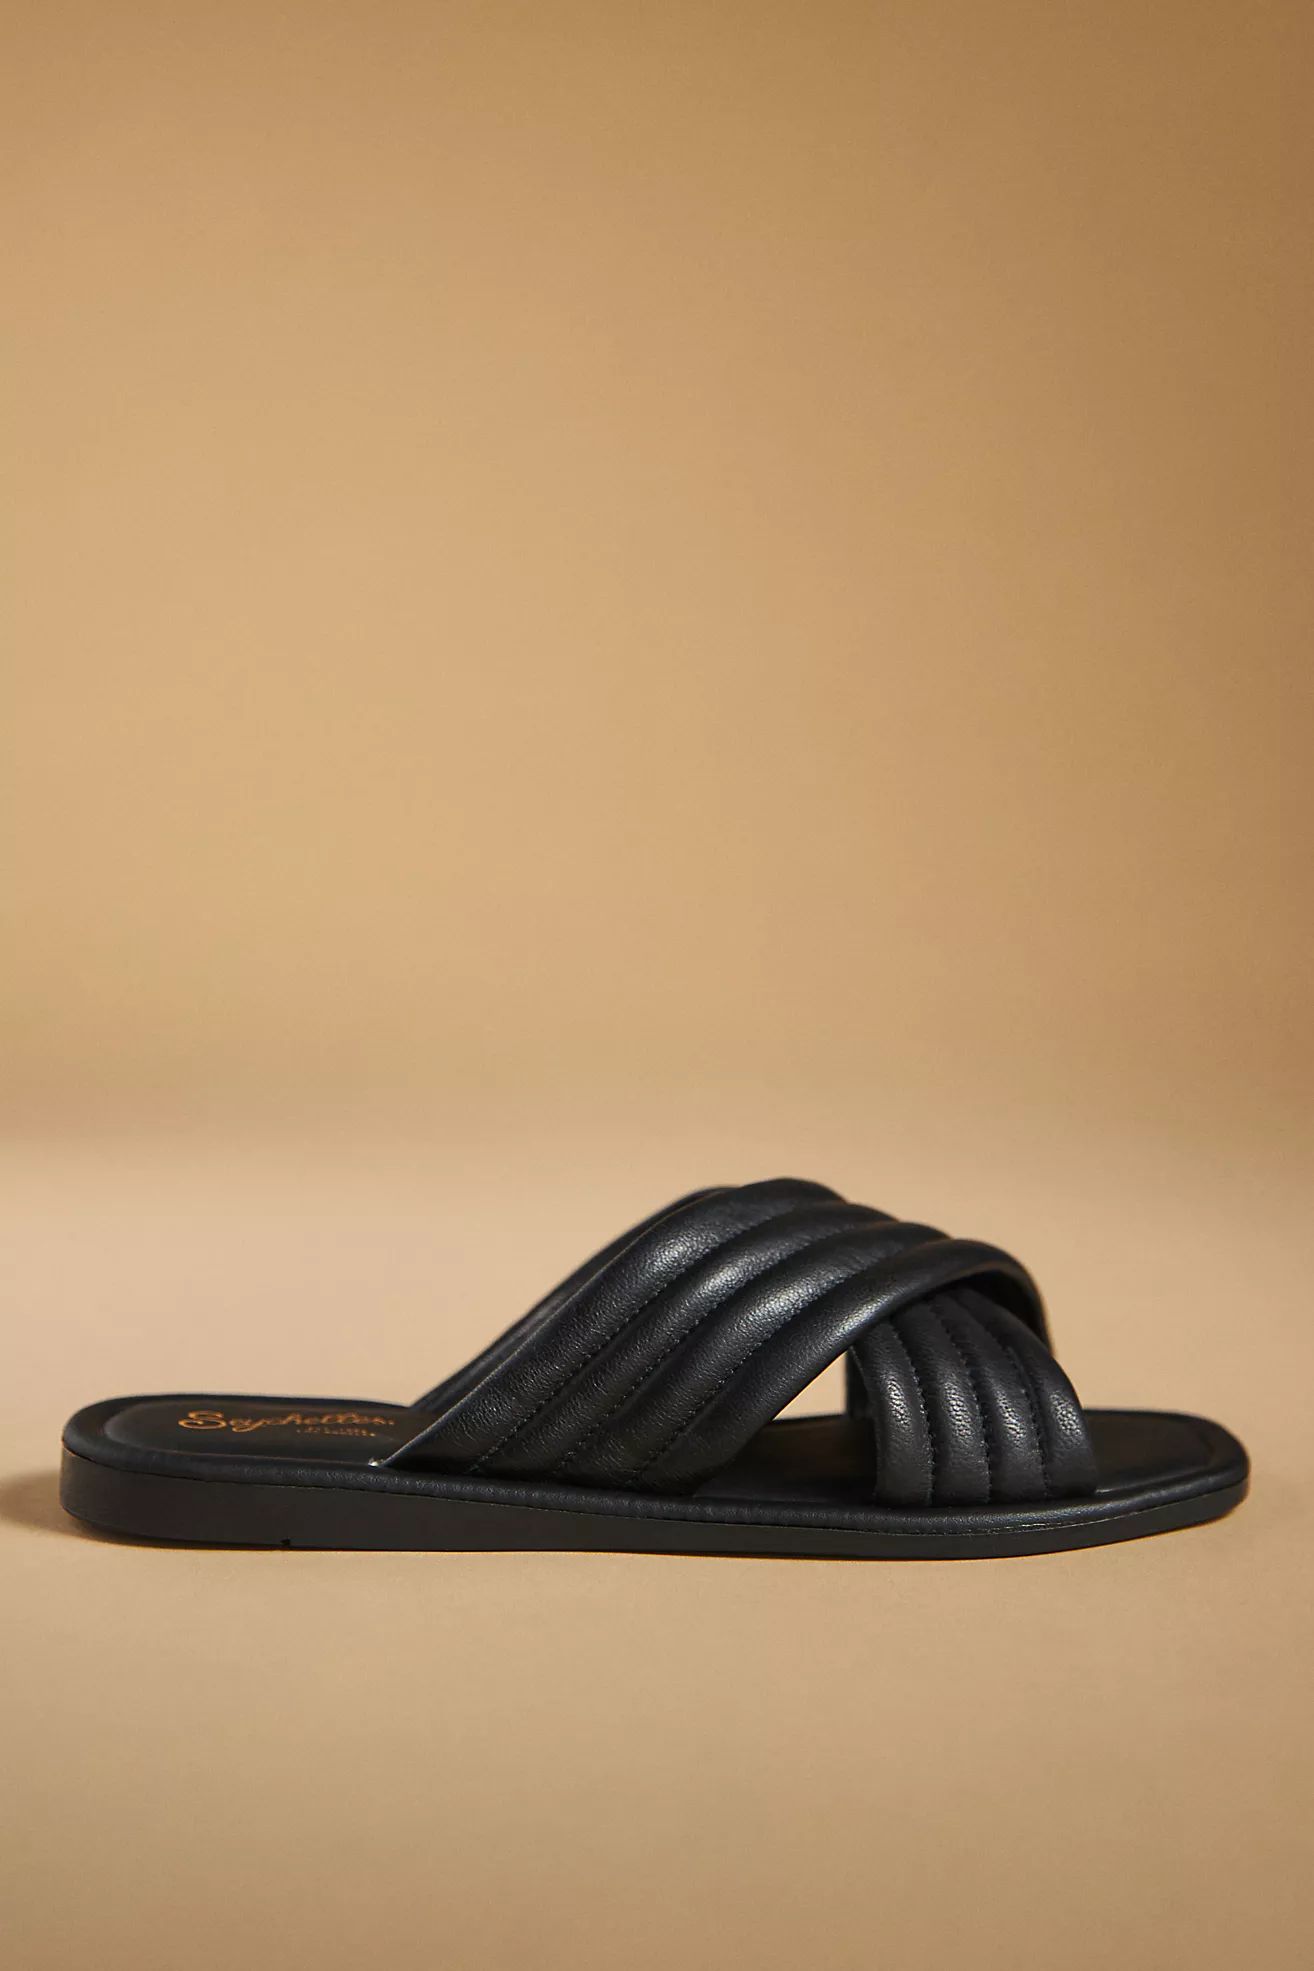 Seychelles Word For Word Sandals | Anthropologie (US)